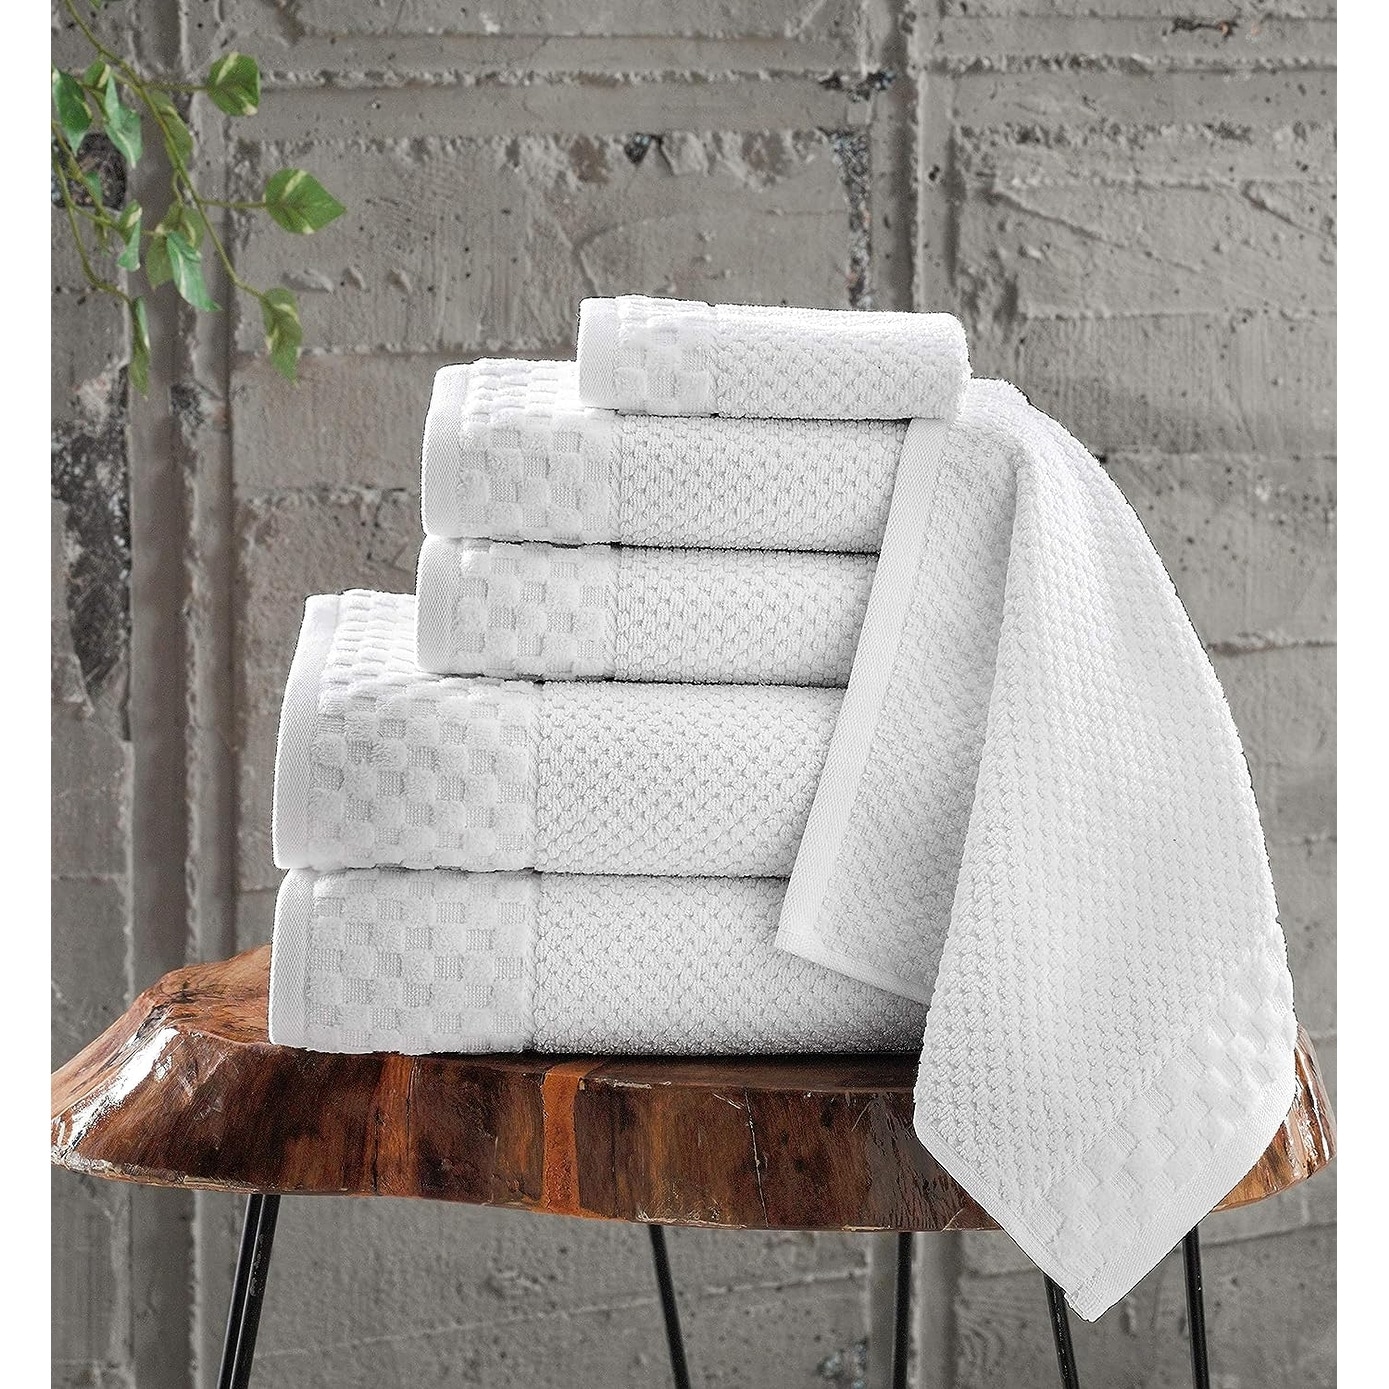 https://ak1.ostkcdn.com/images/products/is/images/direct/02834fec07b2736bde582a5305b11ea5ce9b498c/Boston-Towel-Collection-Turkish-Cotton-Luxury-and-Soft-2-Large-Bath-Towels%2C-2-Washcloths-and-2-Hand-Towels-%28Set-of-6%29.jpg